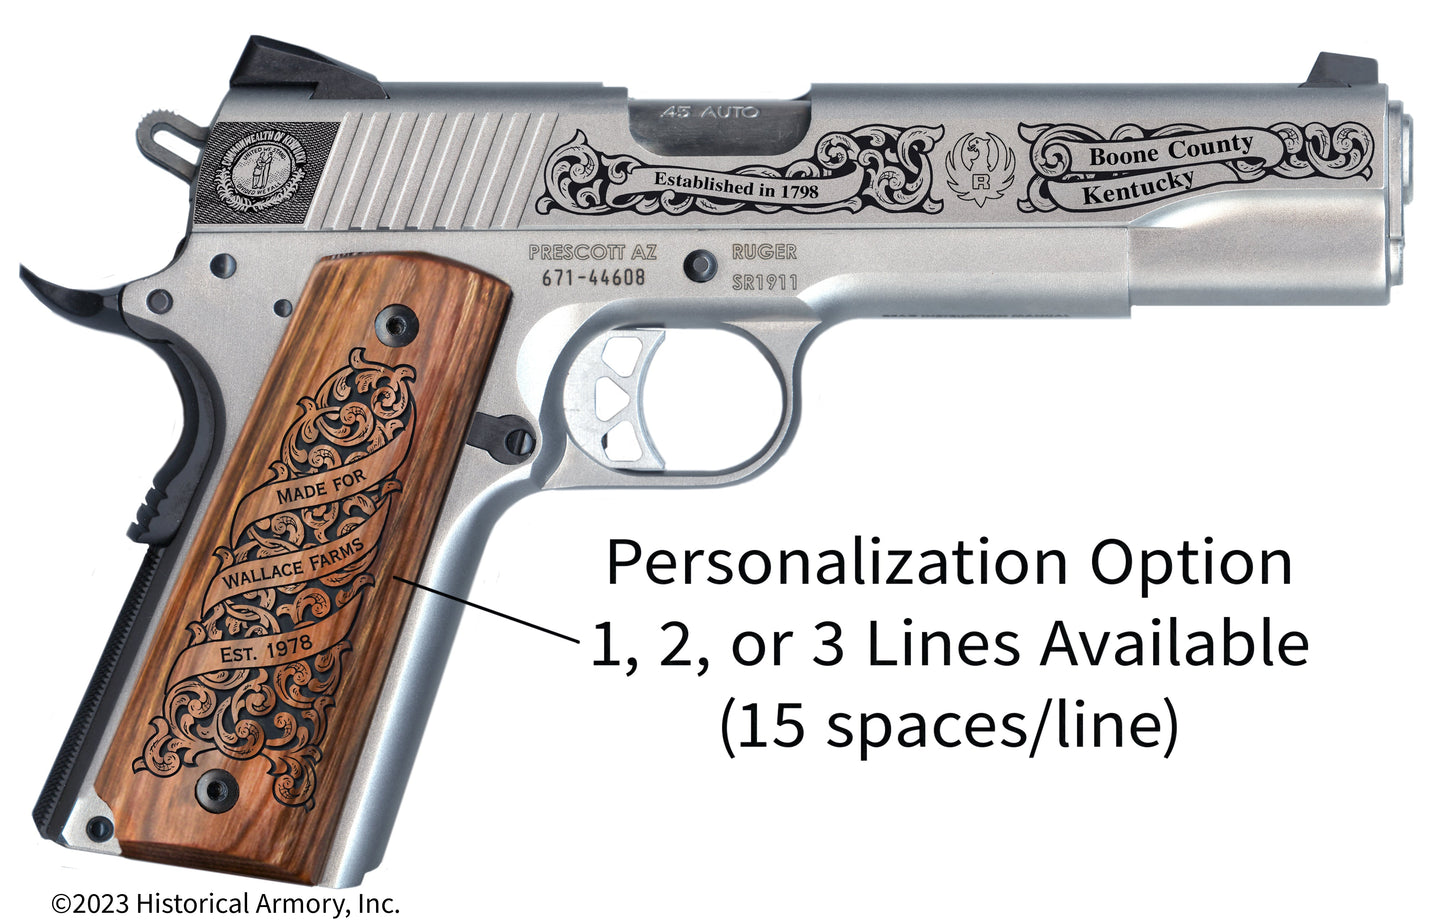 Boone County Kentucky Personalized Engraved .45 Auto Ruger 1911